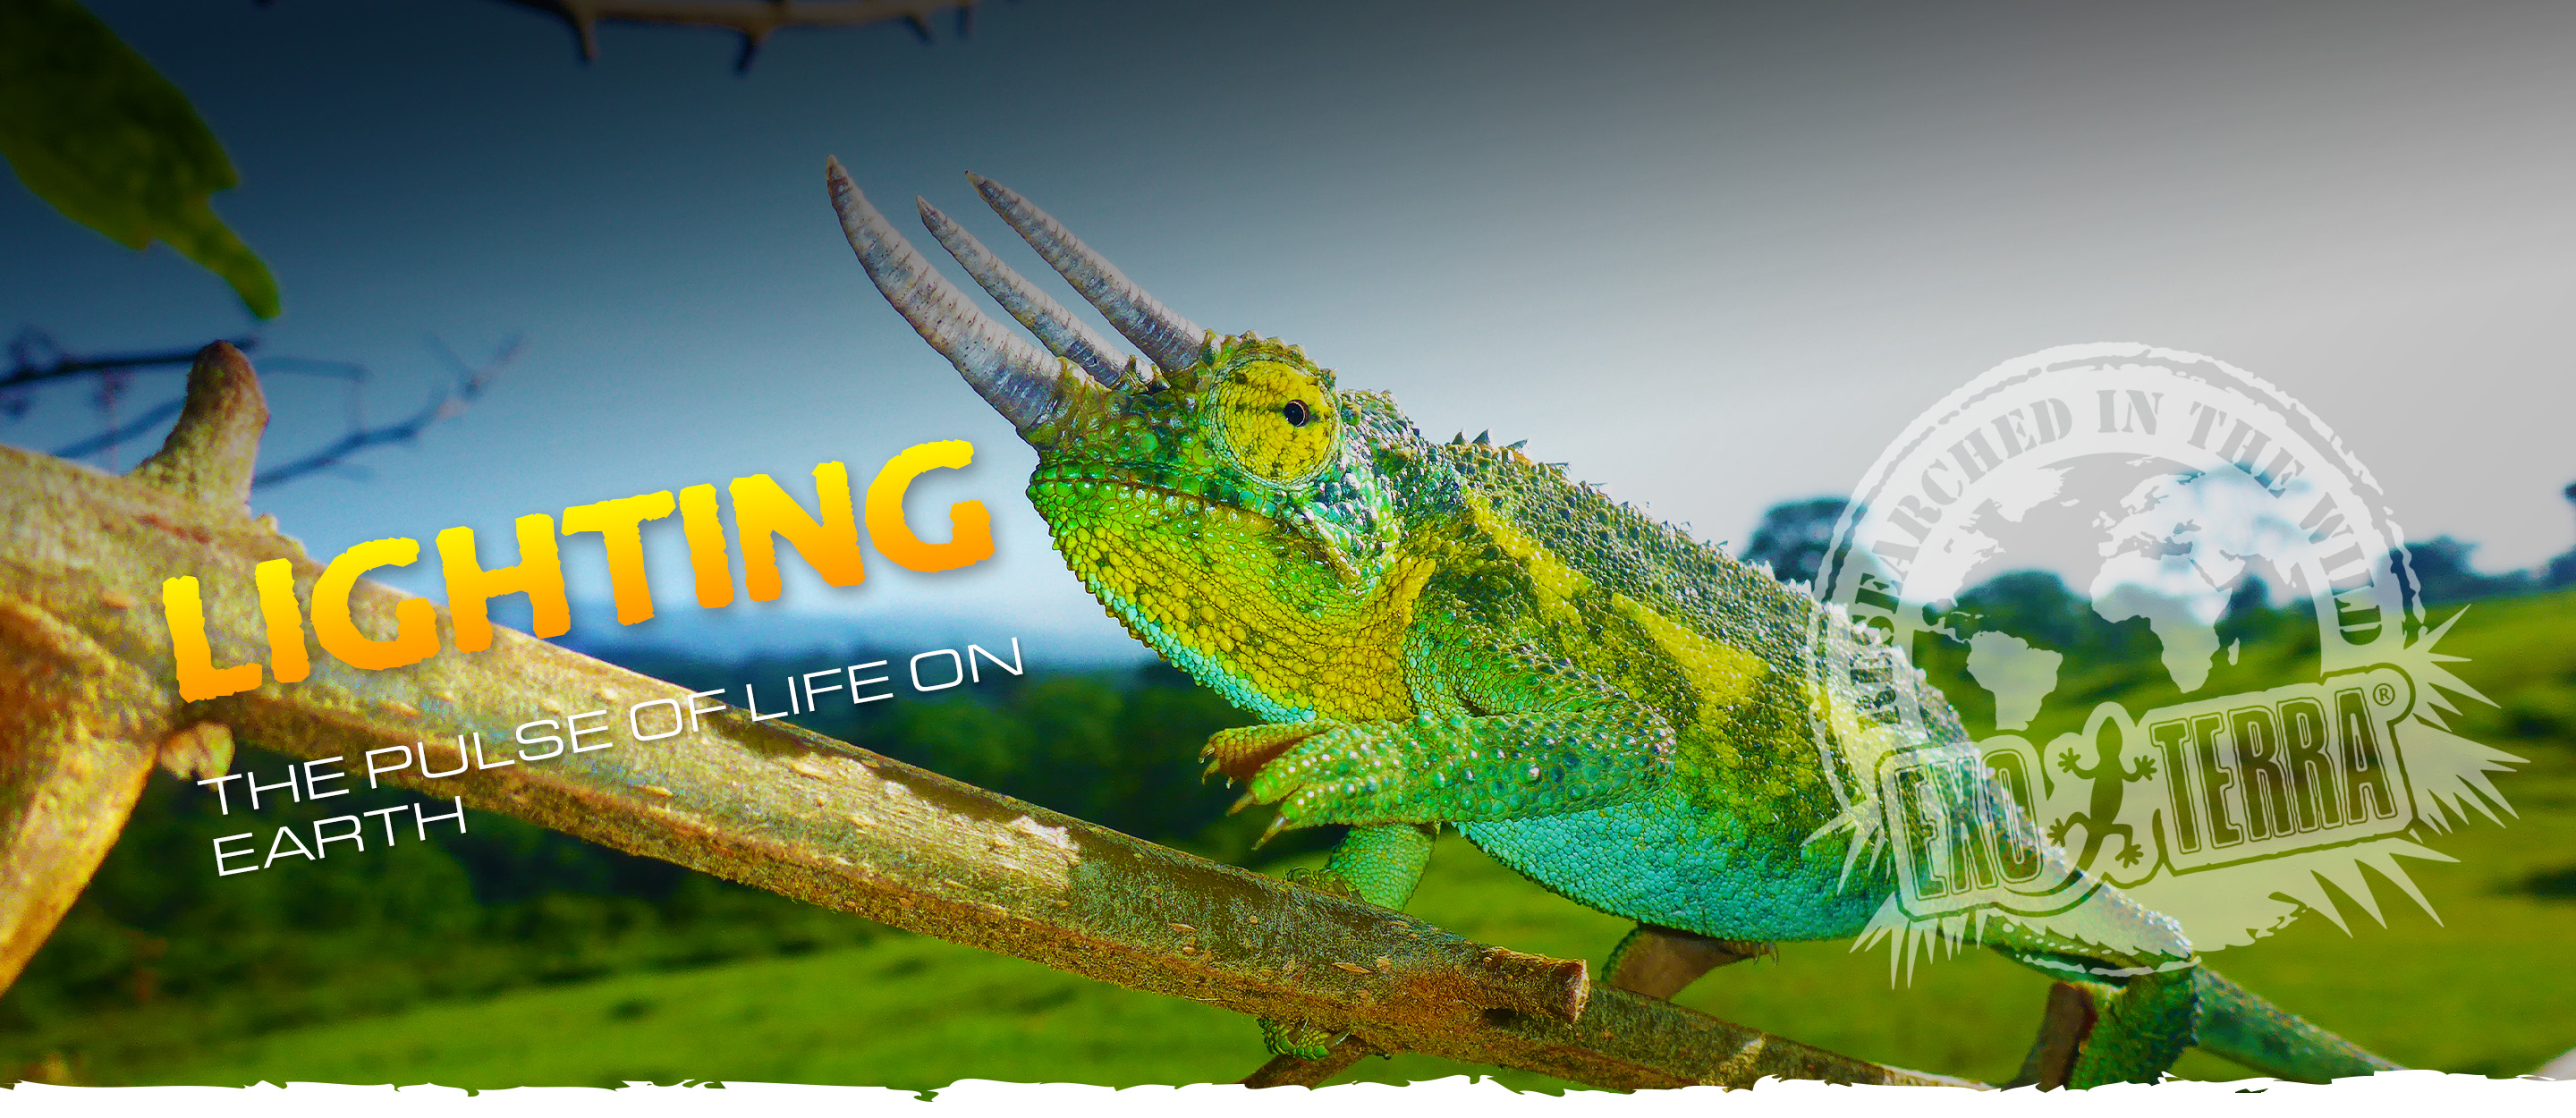 Lighting: light plays a crucial role in the overall wealth and well-being of reptiles and amphibians.